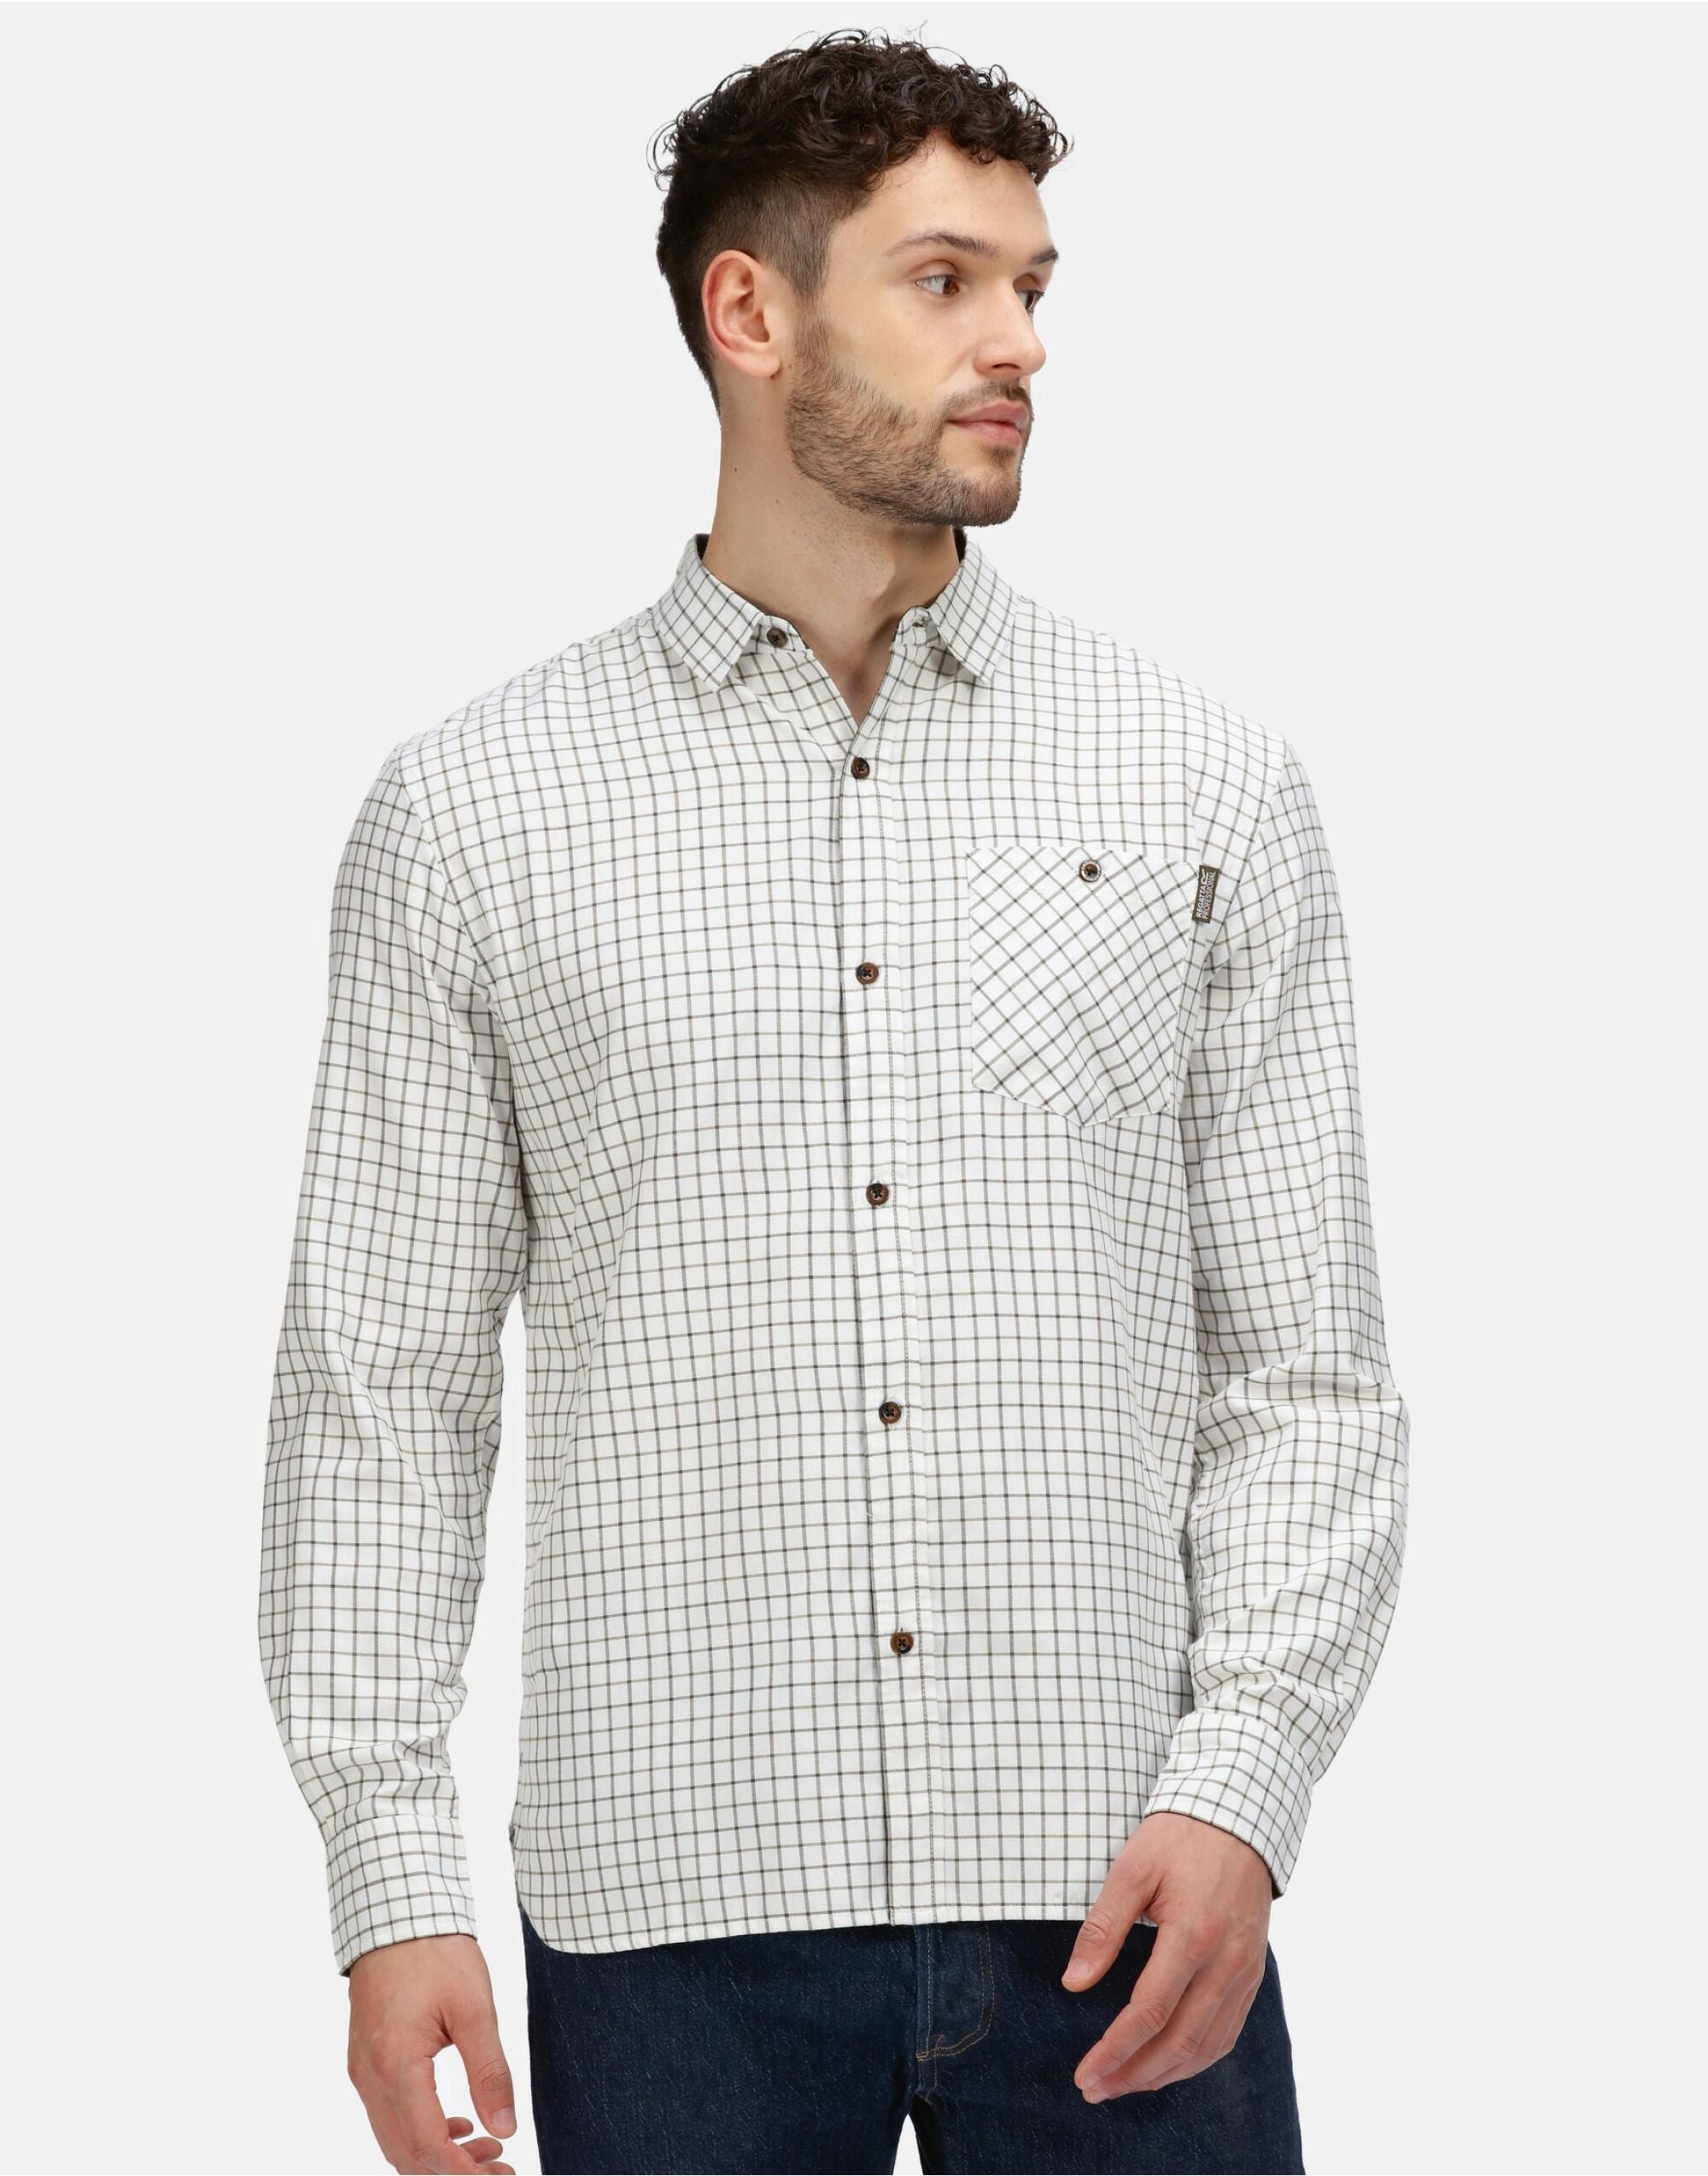 Regatta Professional Tattersall Check Shirt Brushed inner surface for extra warmth and comfort (TRS215)